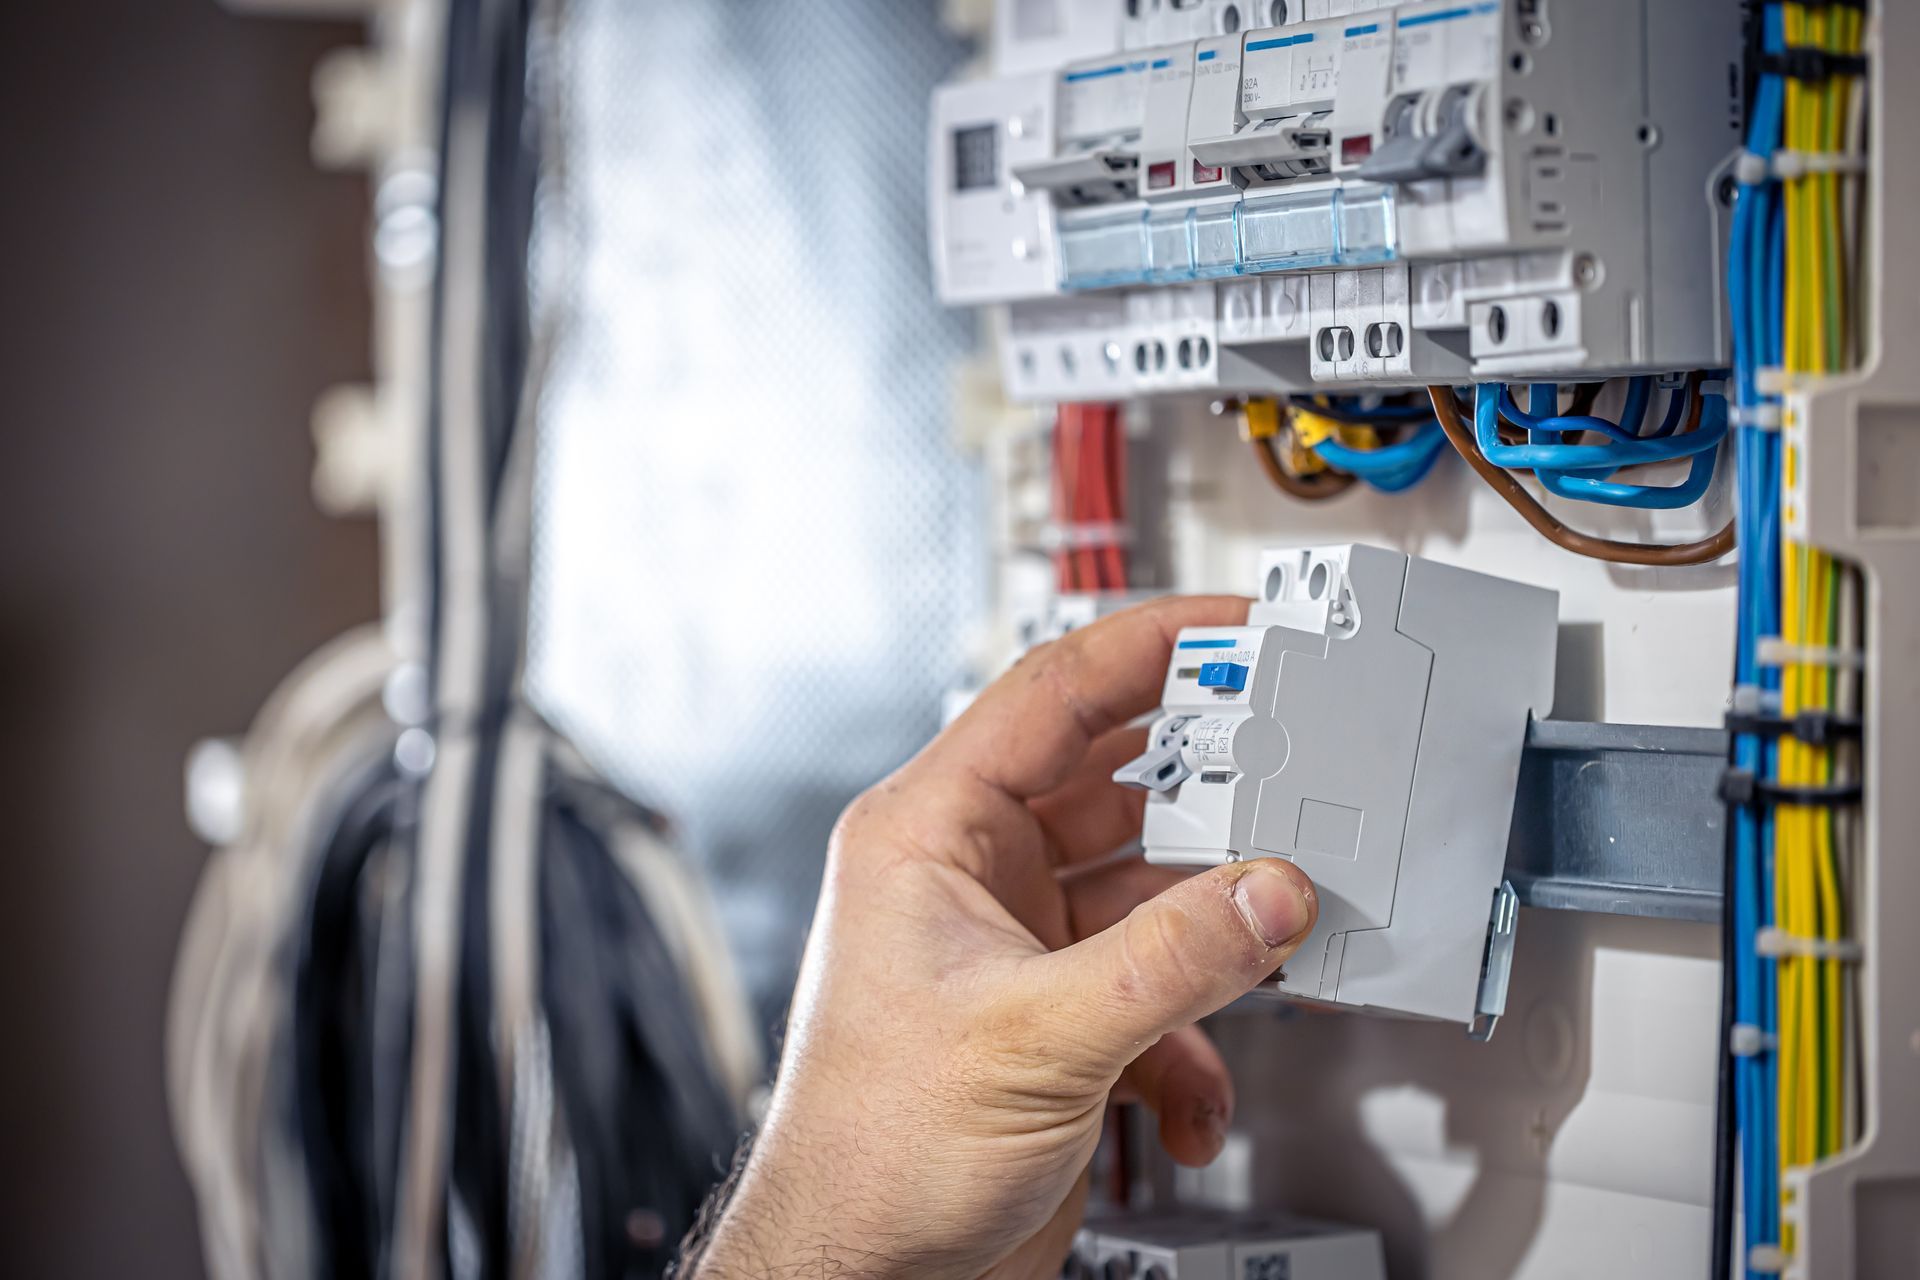 a person is holding a circuit breaker in their hand in front of an electrical box .